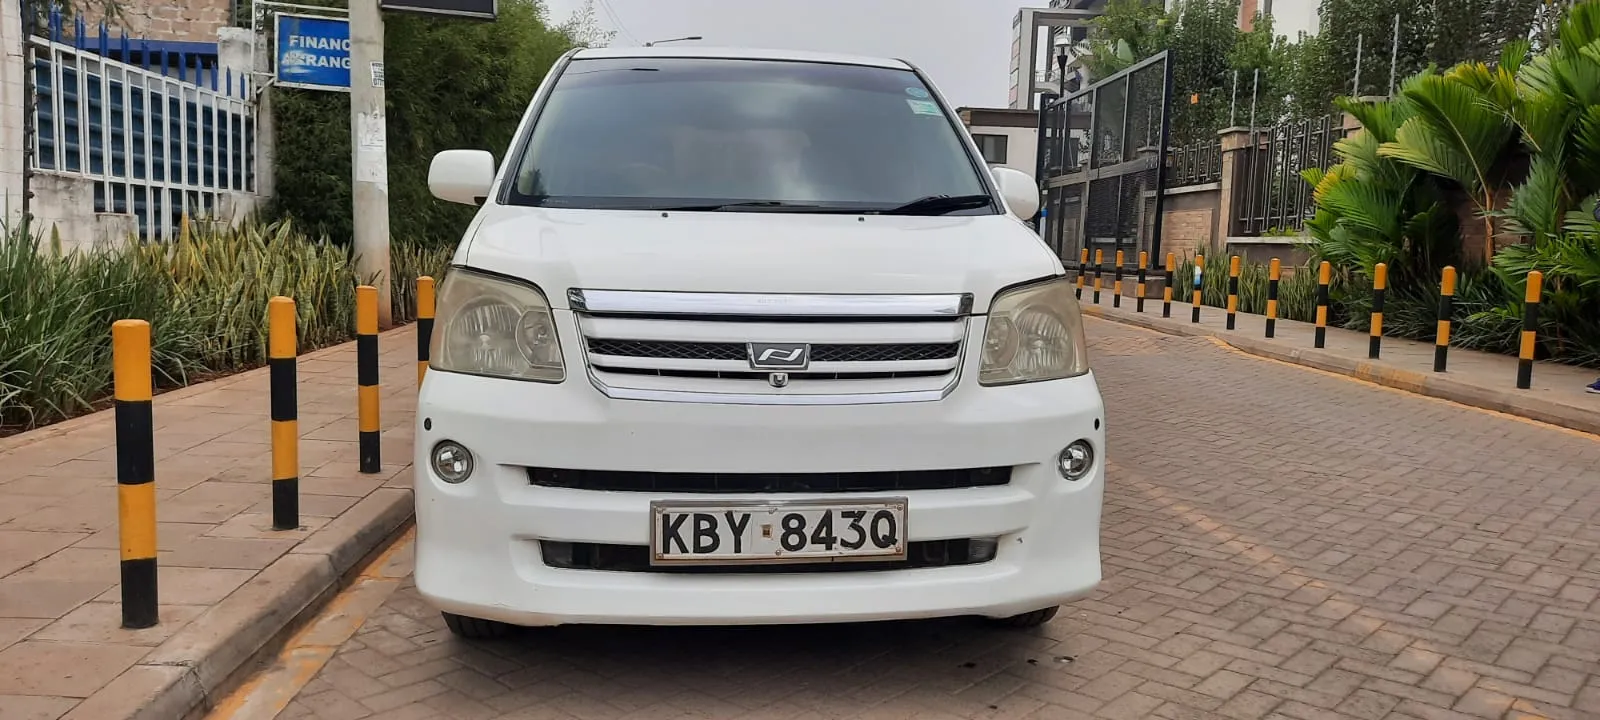 Toyota Noah 2007 Pay 20% 80% in 60 MONTHLY INSTALLMENTS as New